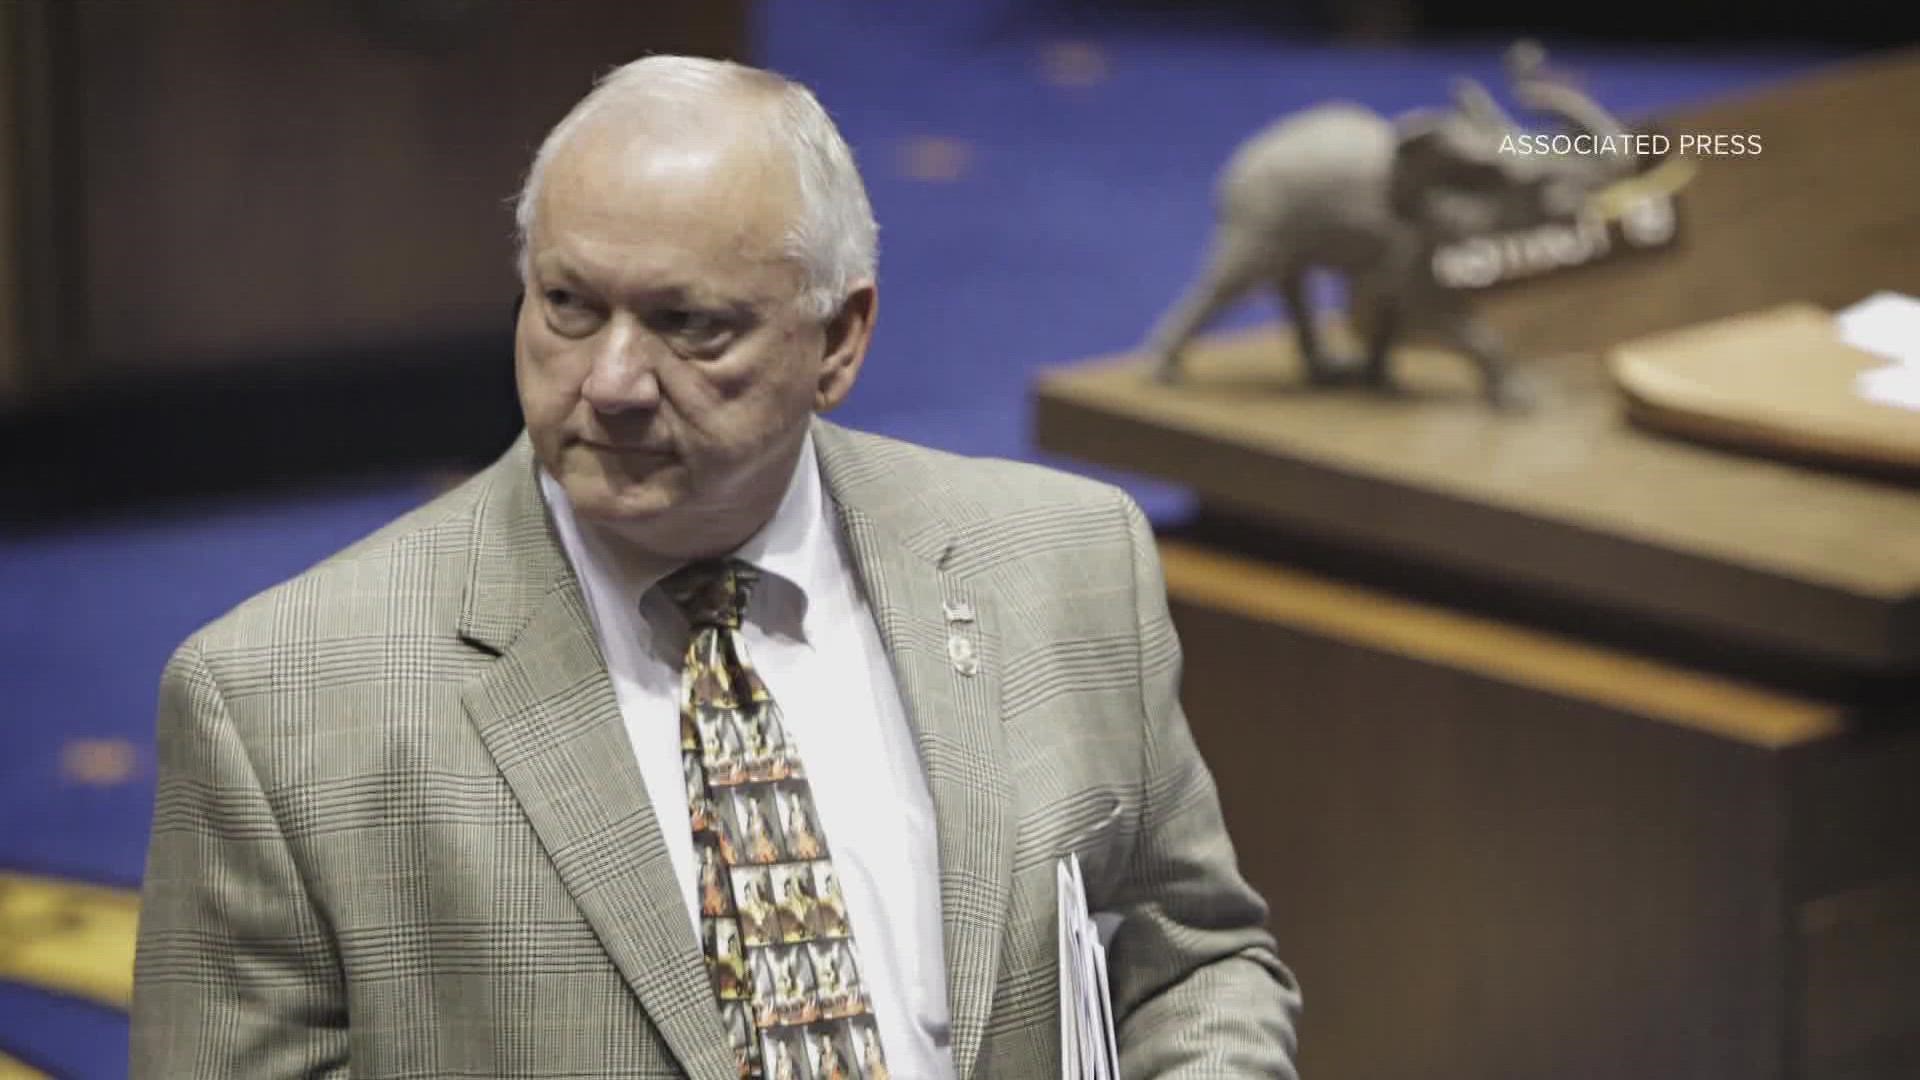 The Arizona Senate Republicans said the former state senator had passed away from an illness.